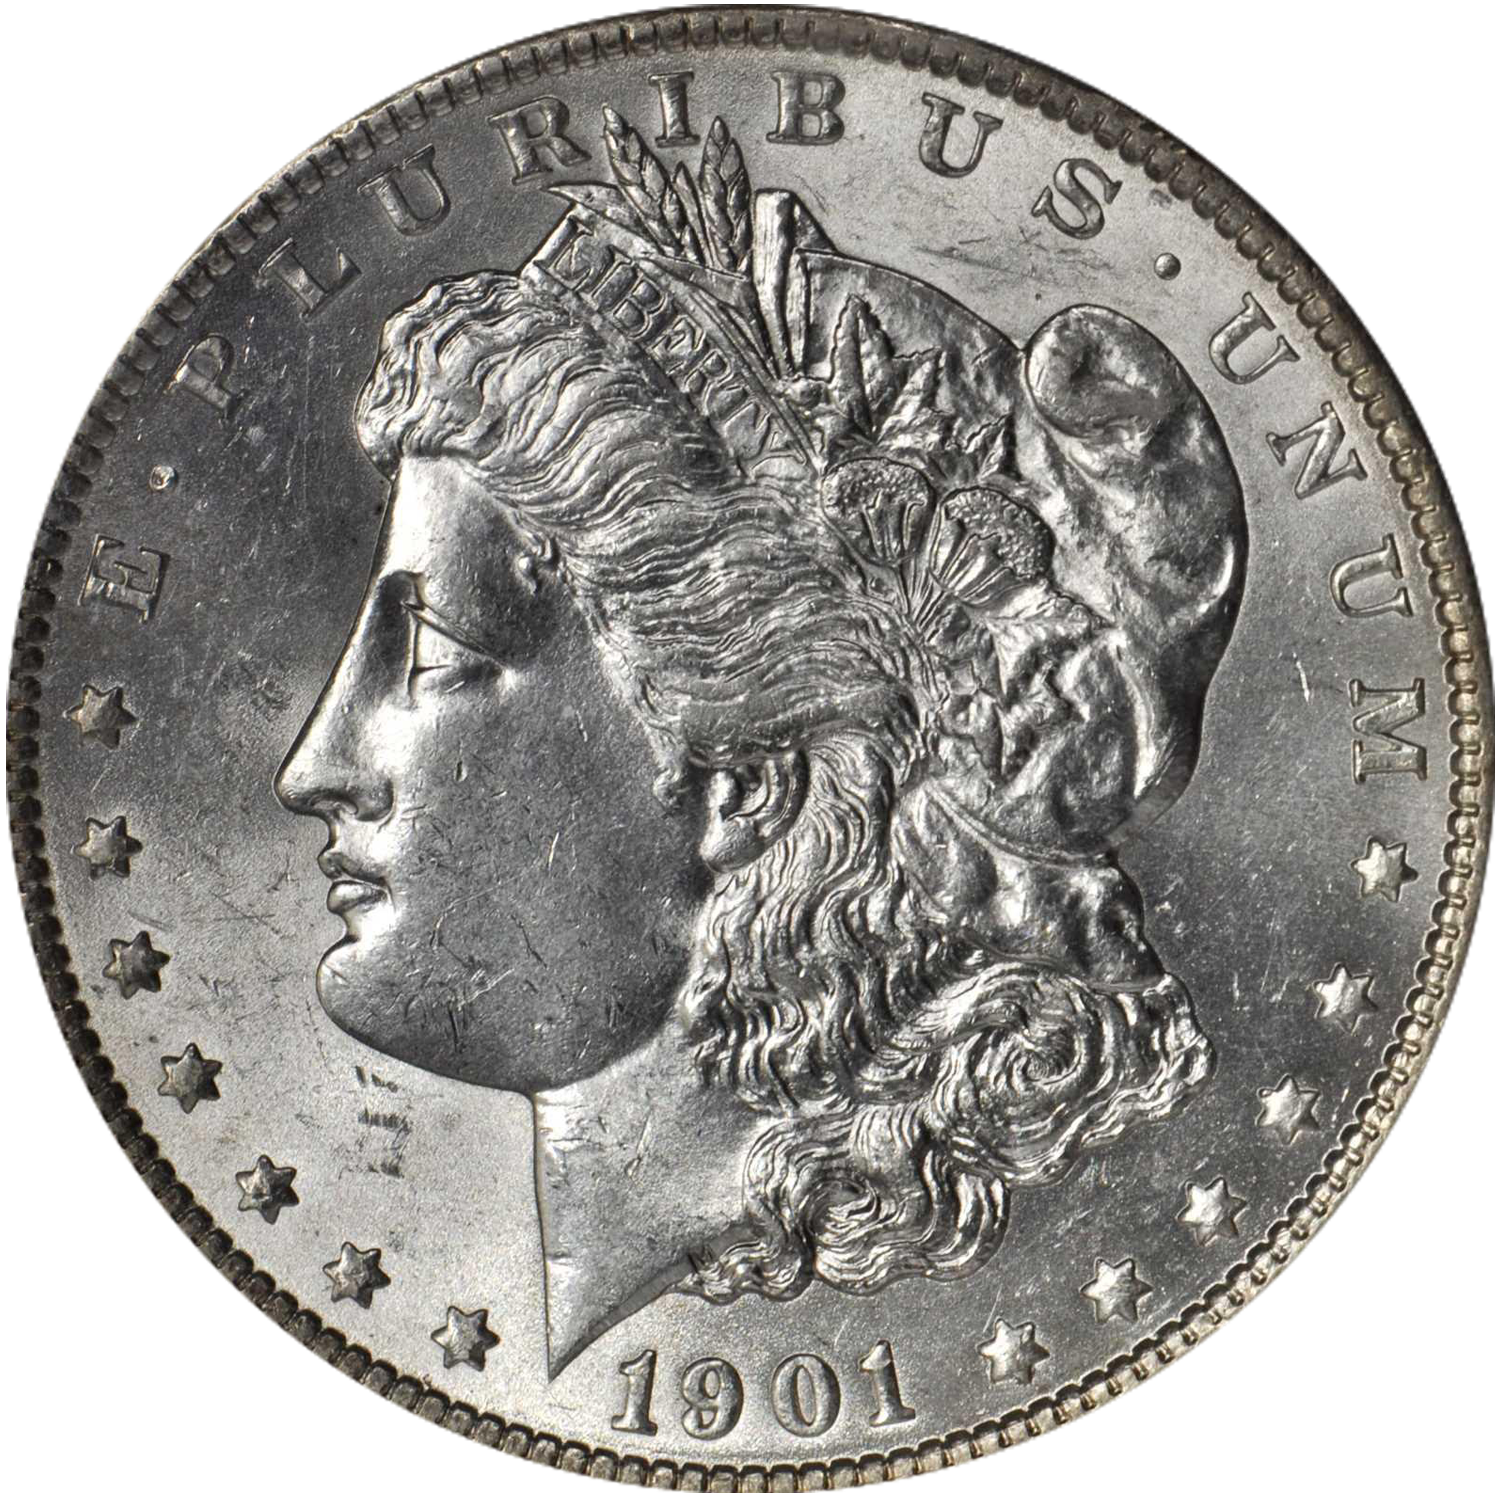 1901 p mint double die reverse morgan dollar price guide value